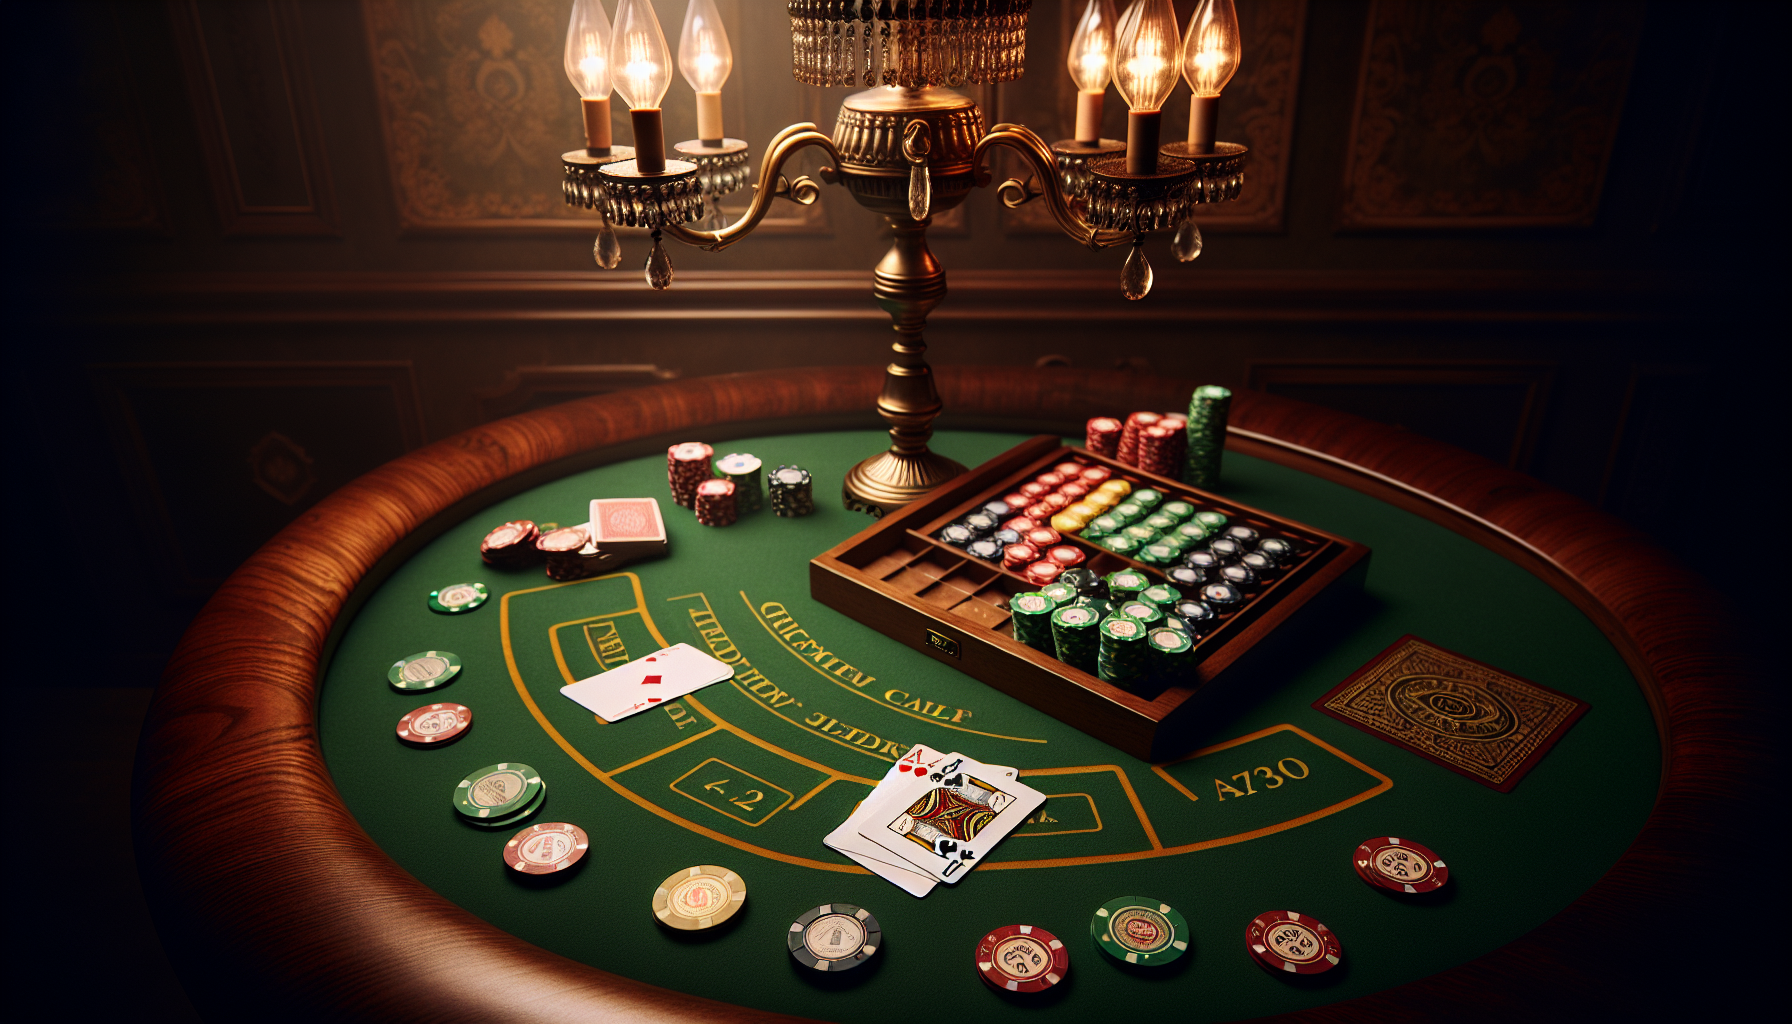 Illustration of blackjack table with cards and chips